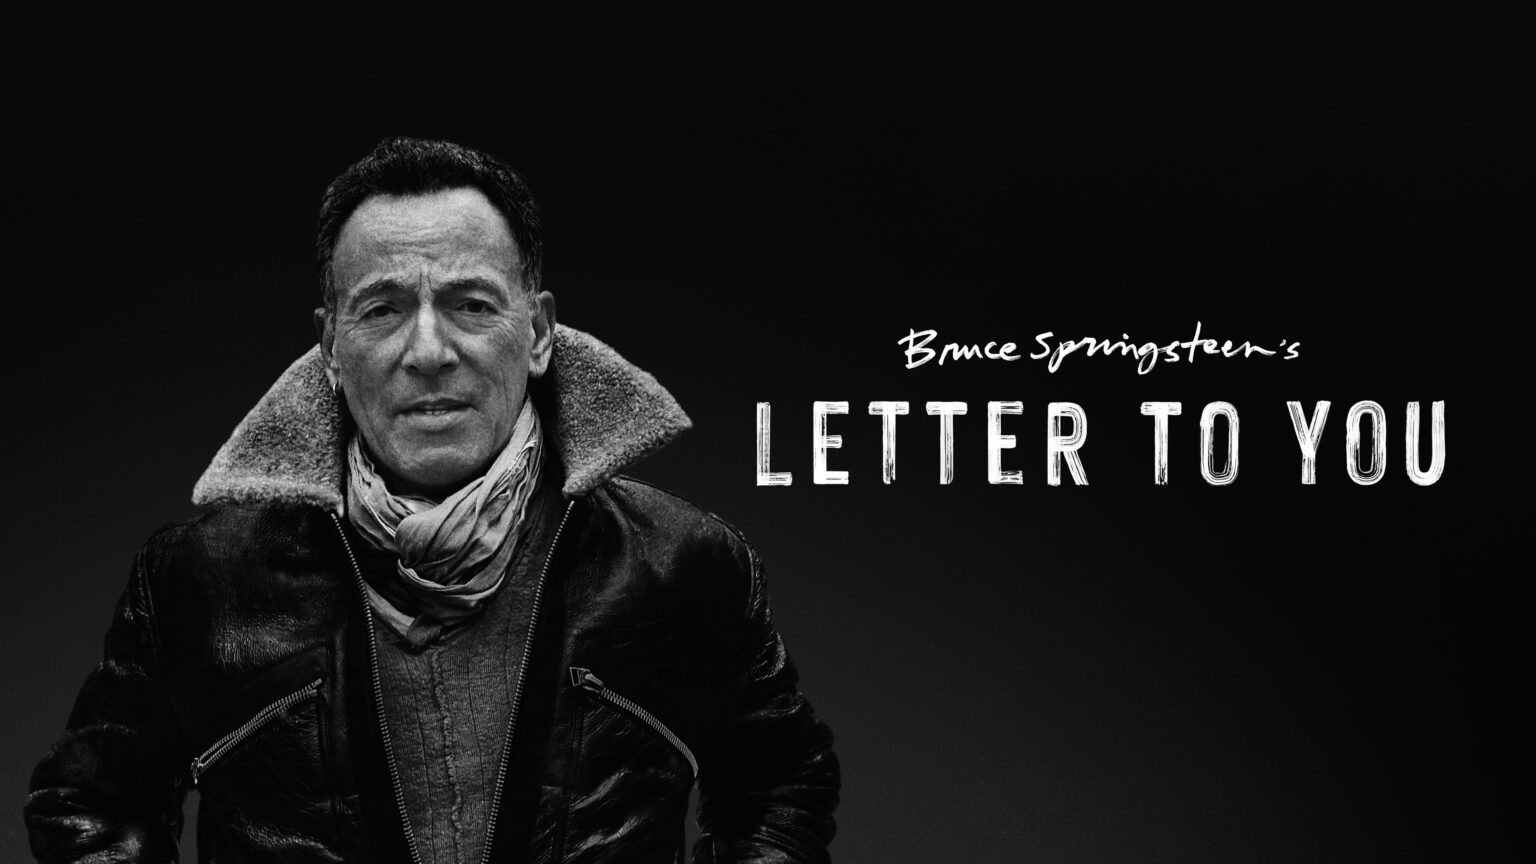 Bruce Springsteen ‘Letter To You’ debuts October 23